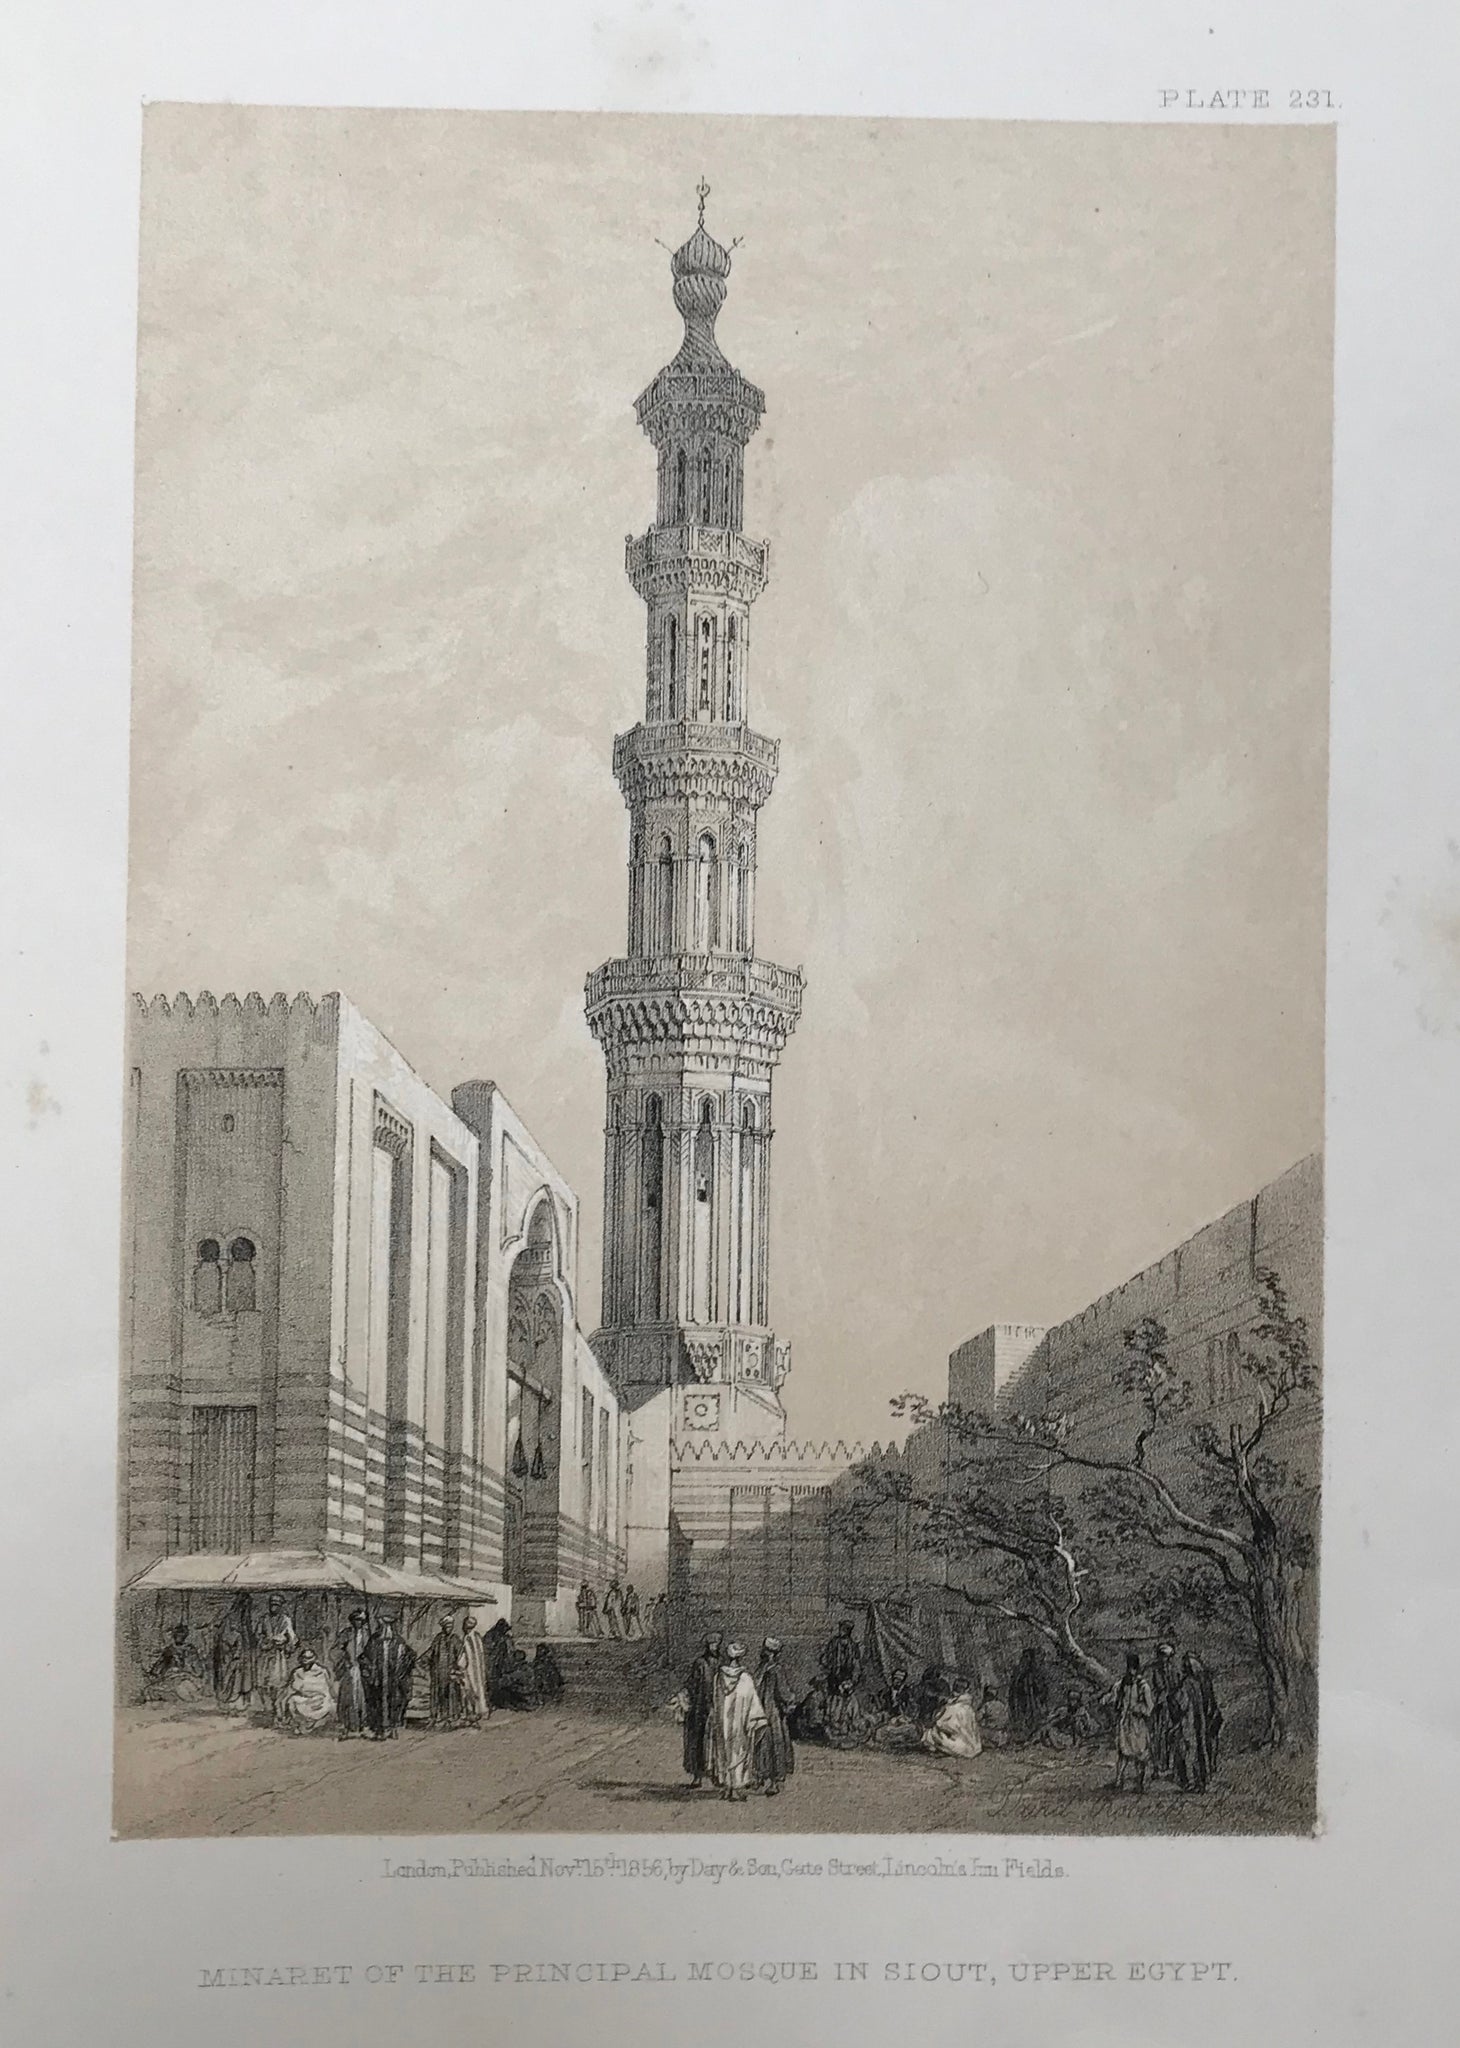 Original Antique Lithographs  by David Roberts  (1796 Edinburgh - London 1864)  "Minaret of the Principal Mosque in Siout, Upper Egypt"  This lithograph is from the 1855 edition published in quarto size by Day and Son in London. It is dated Nov. 15th, 1855. Included is an extra page of text.  Very minor spotting in margins. Fine, clean image.